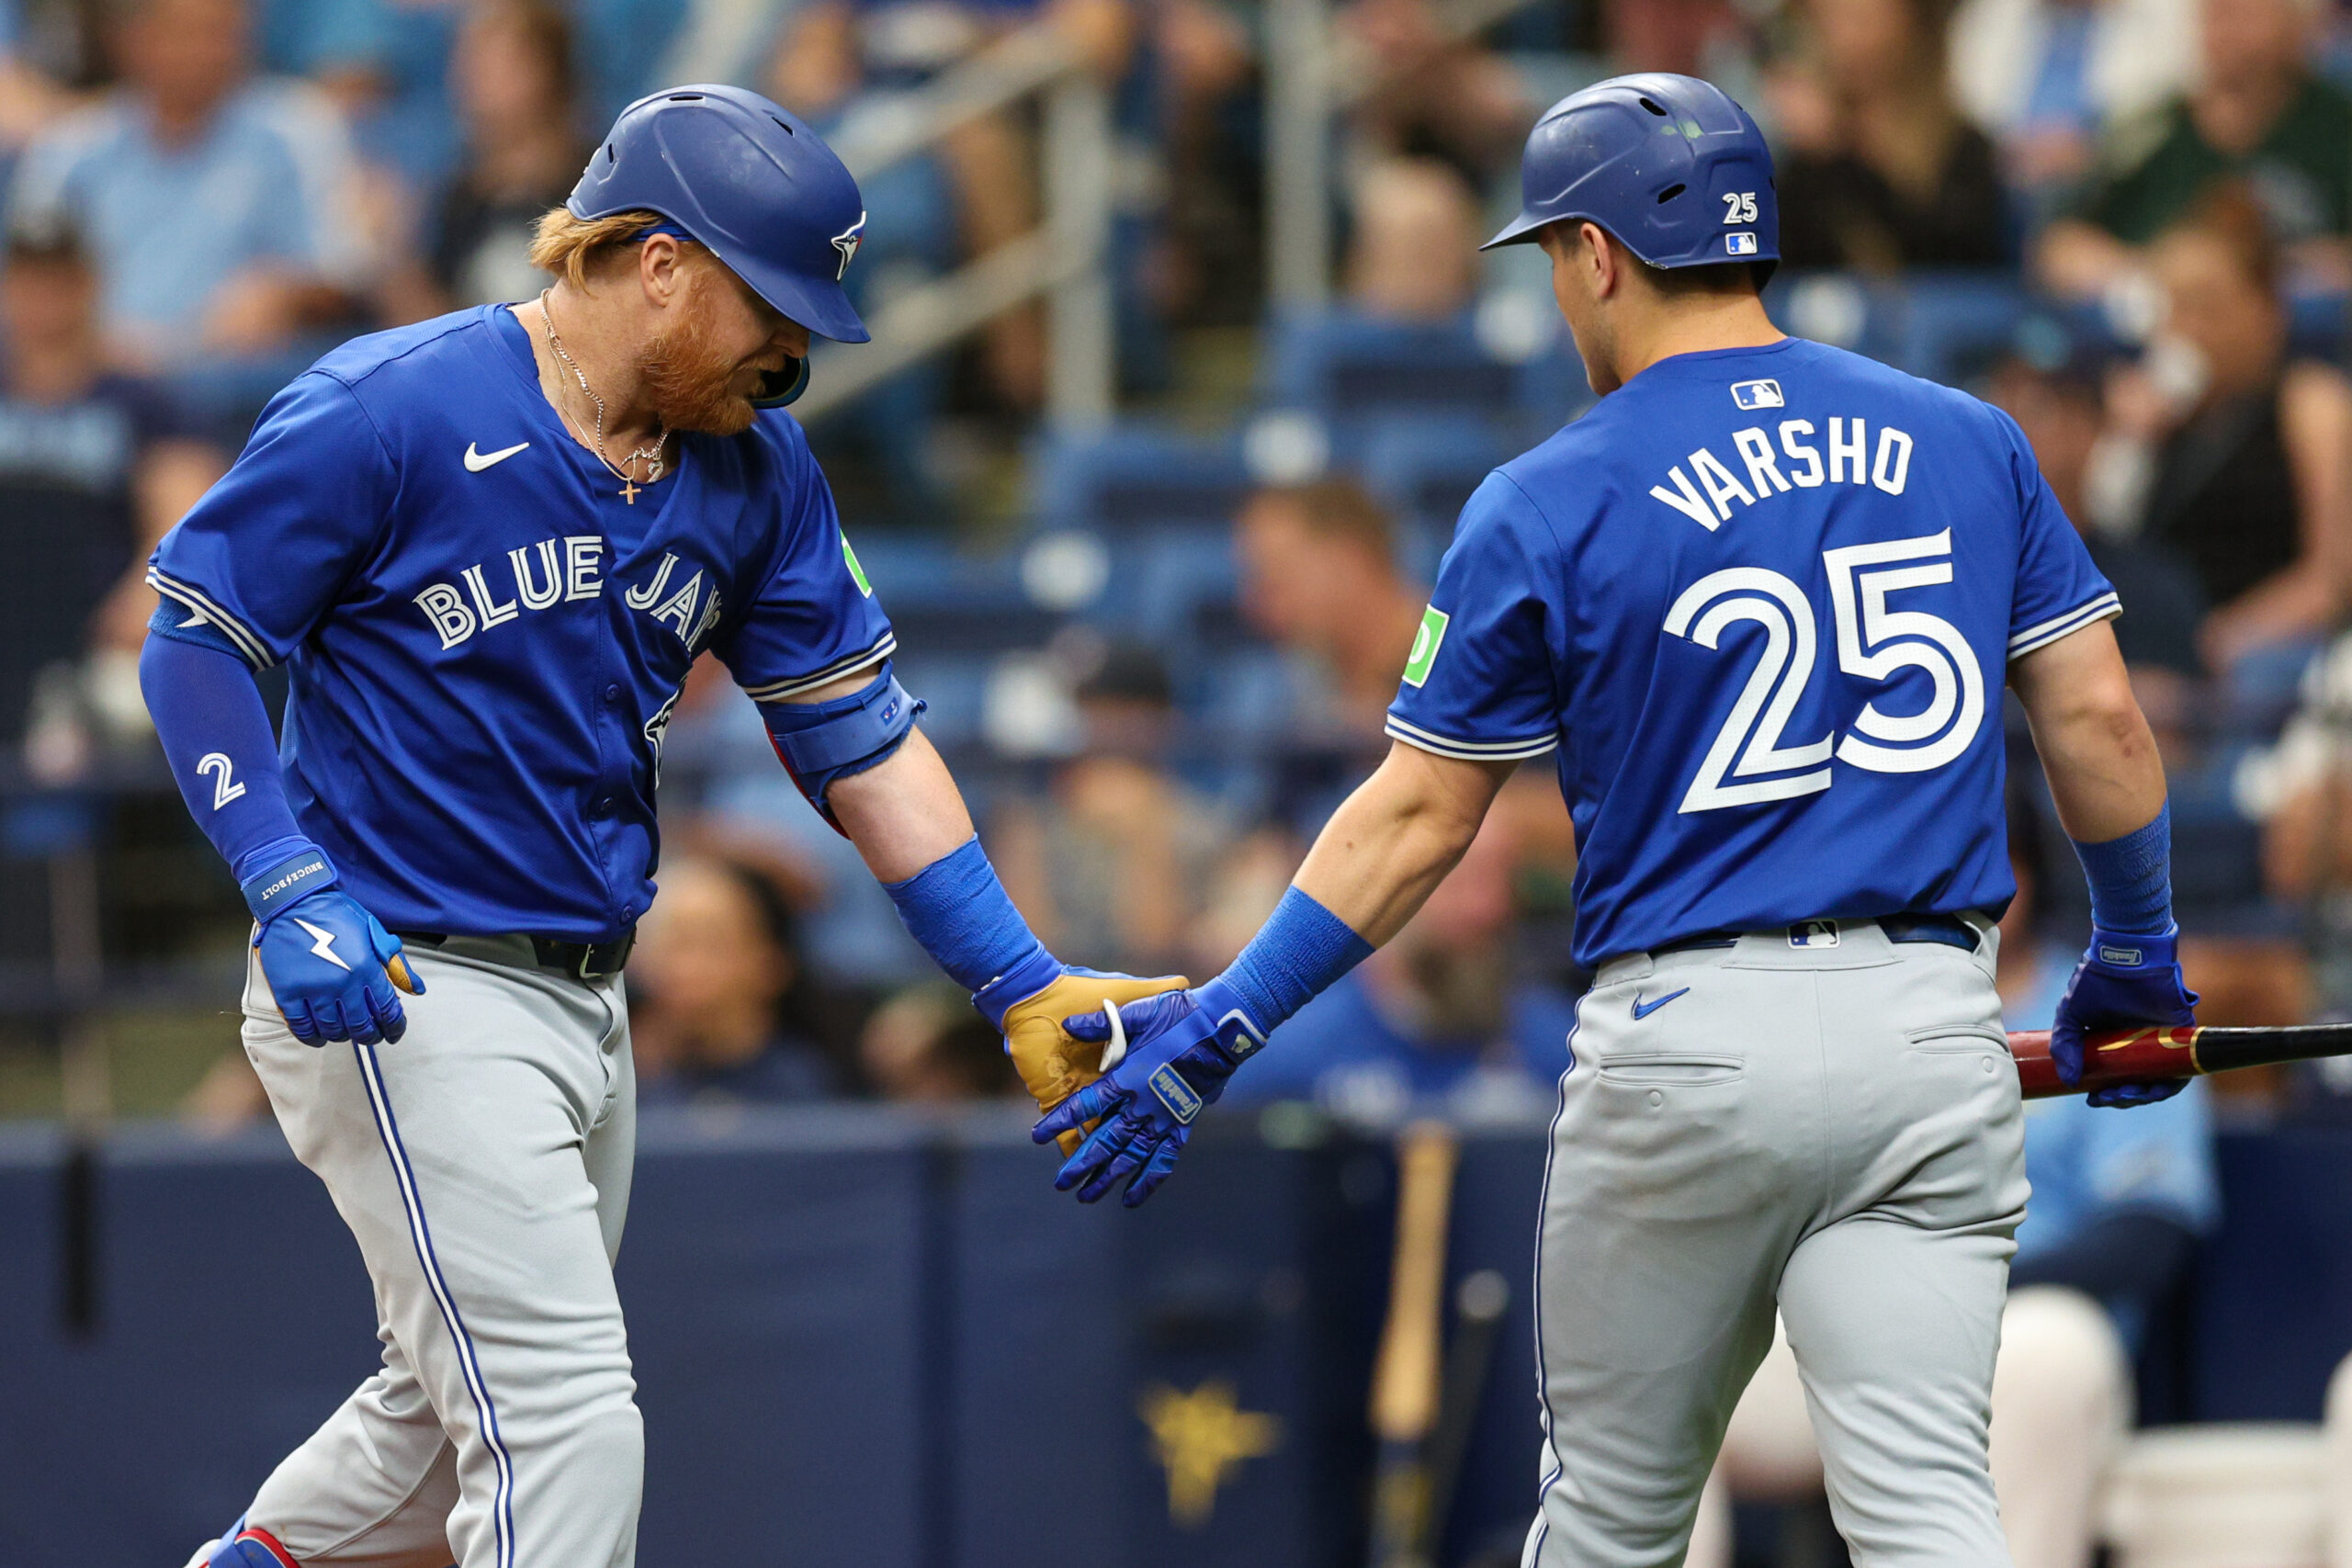 Justin Turner has been getting better with age and has been a spark plug for the Toronto Blue Jays